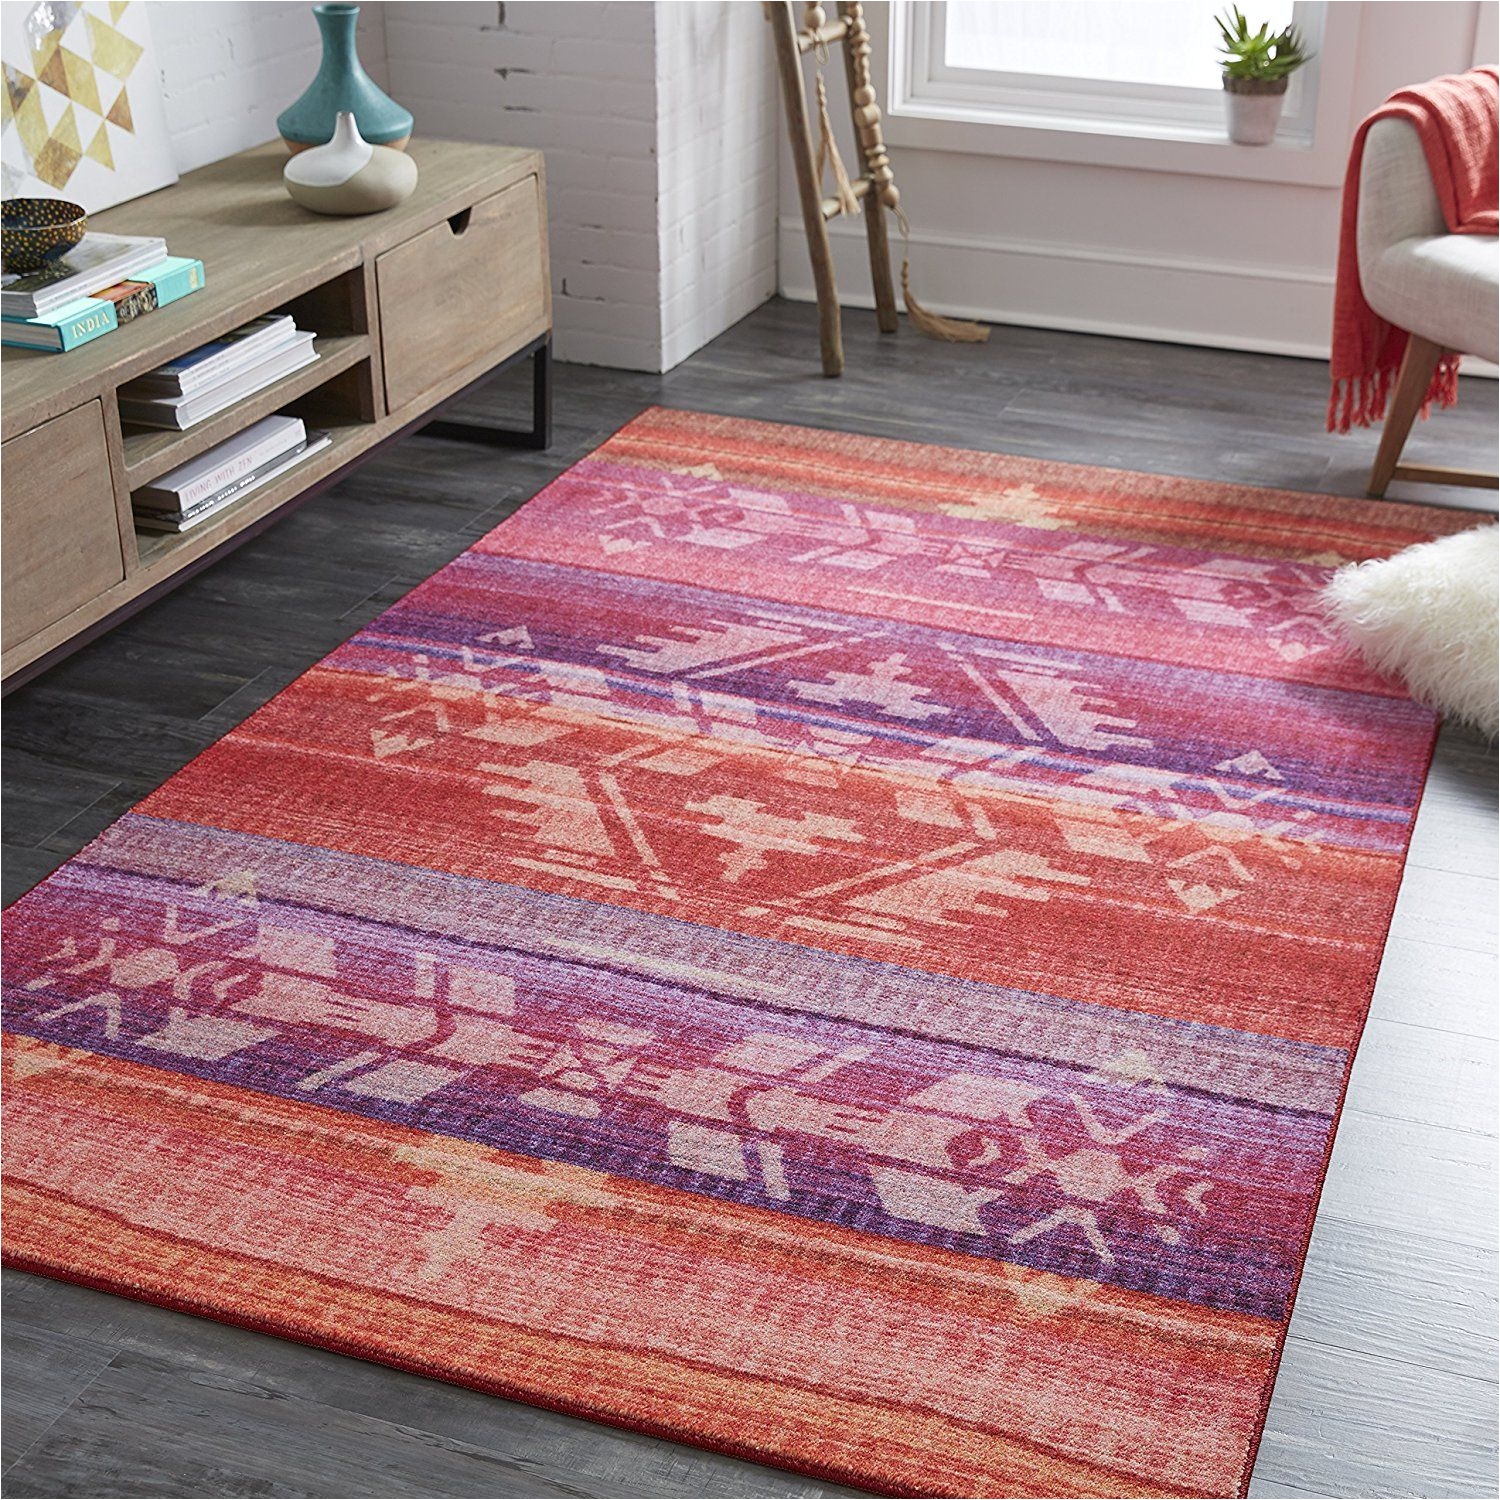 transform your boho space and pops of hot pink with mohawk s tribal blanket area rug